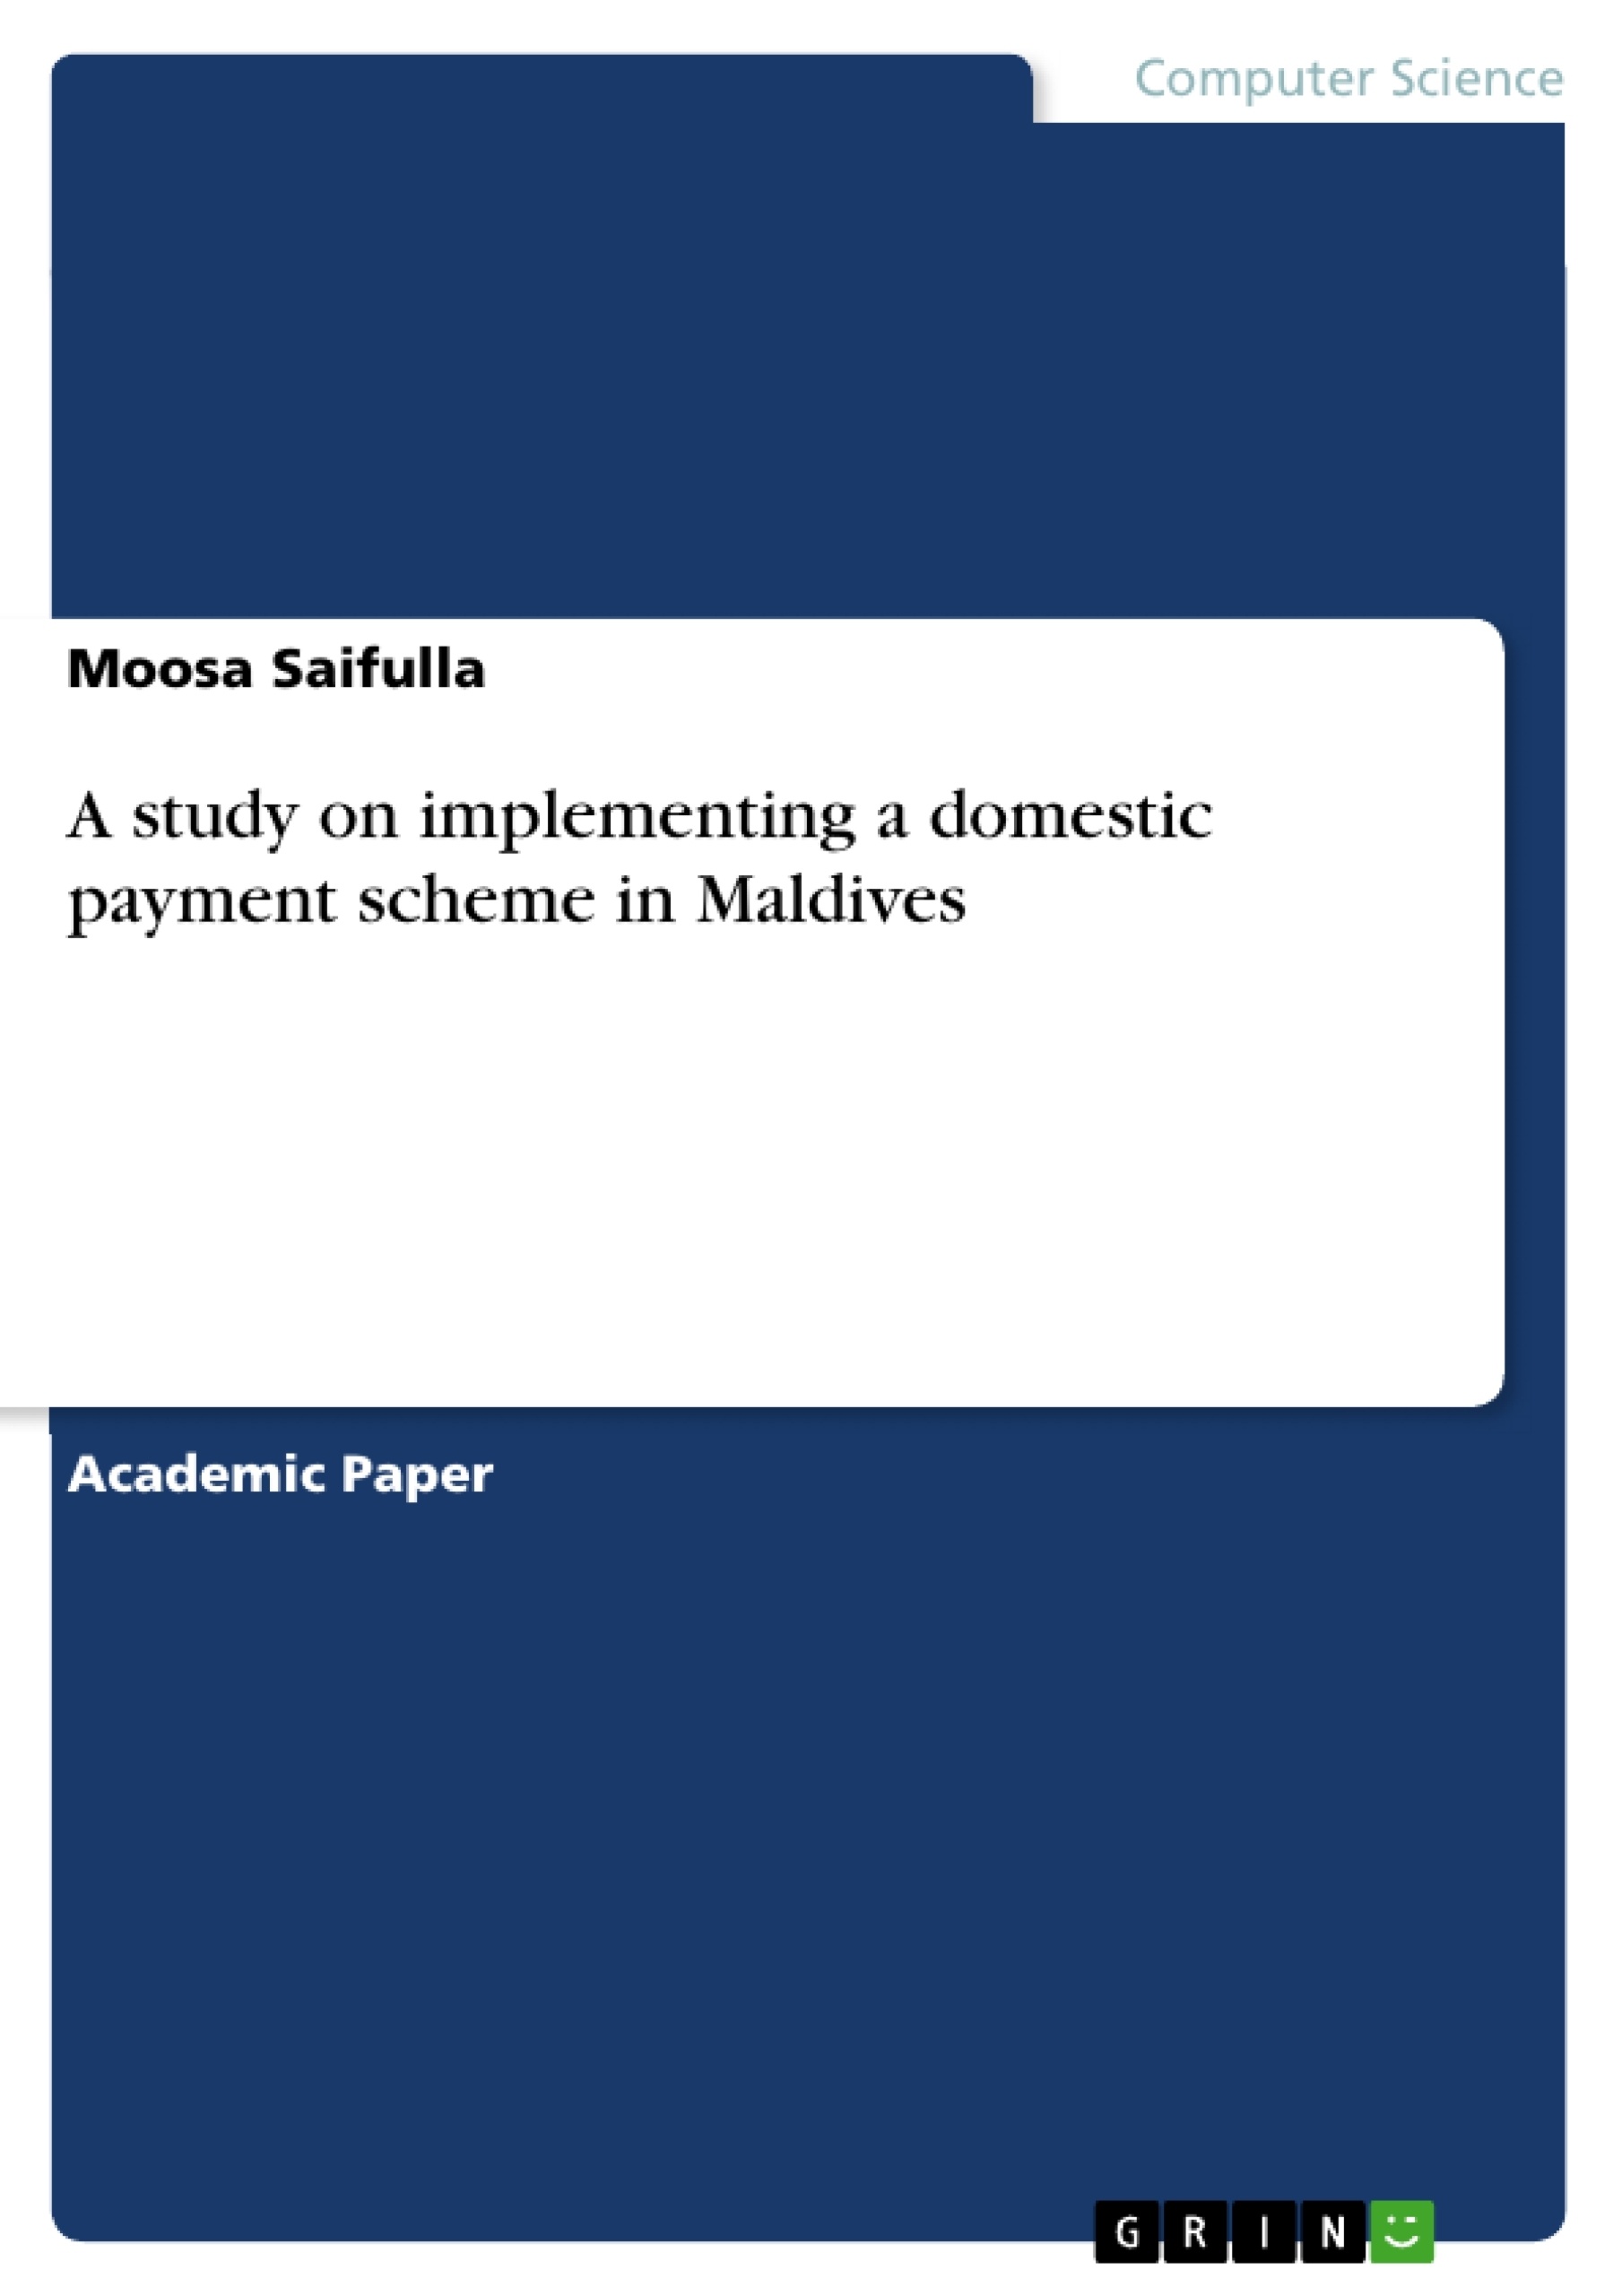 Título: A study on implementing a domestic payment scheme in Maldives